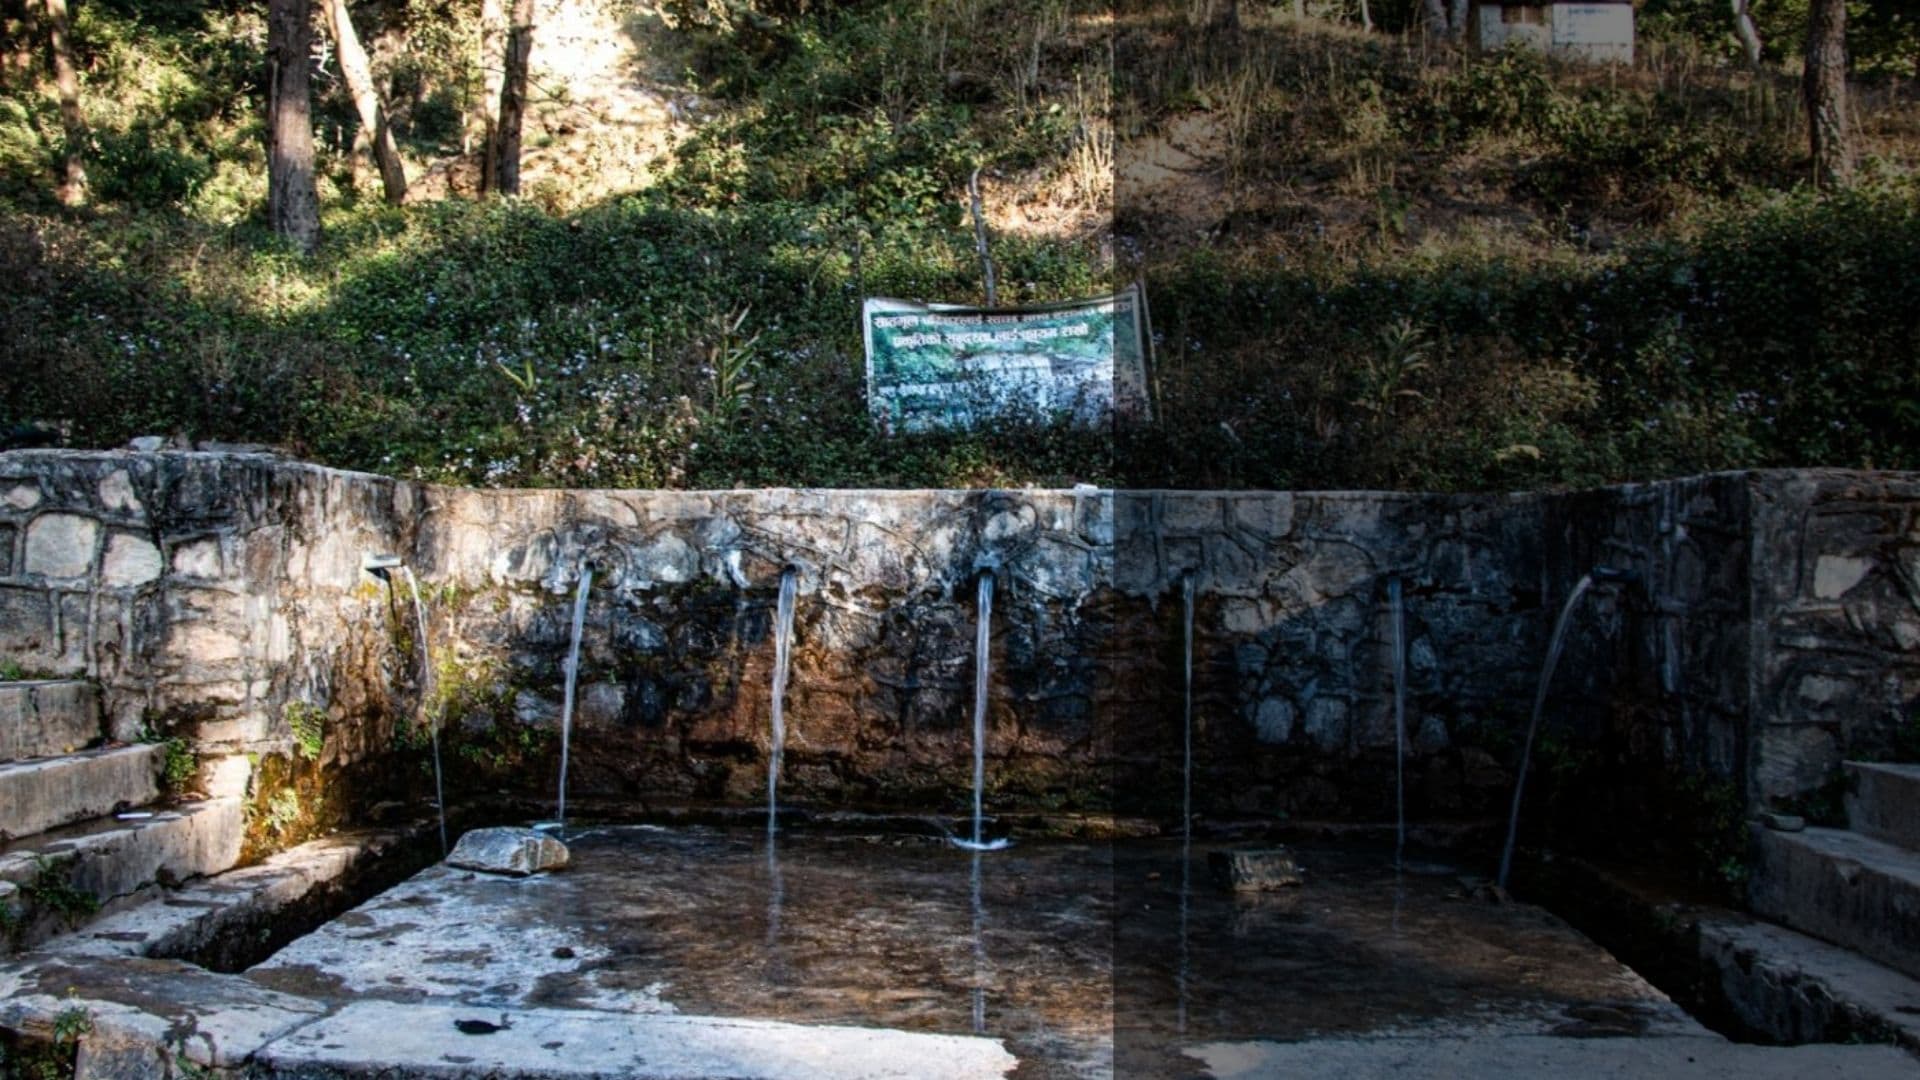 In photos: The story of Nepal's first, and now nearly forgotten, hydropower project